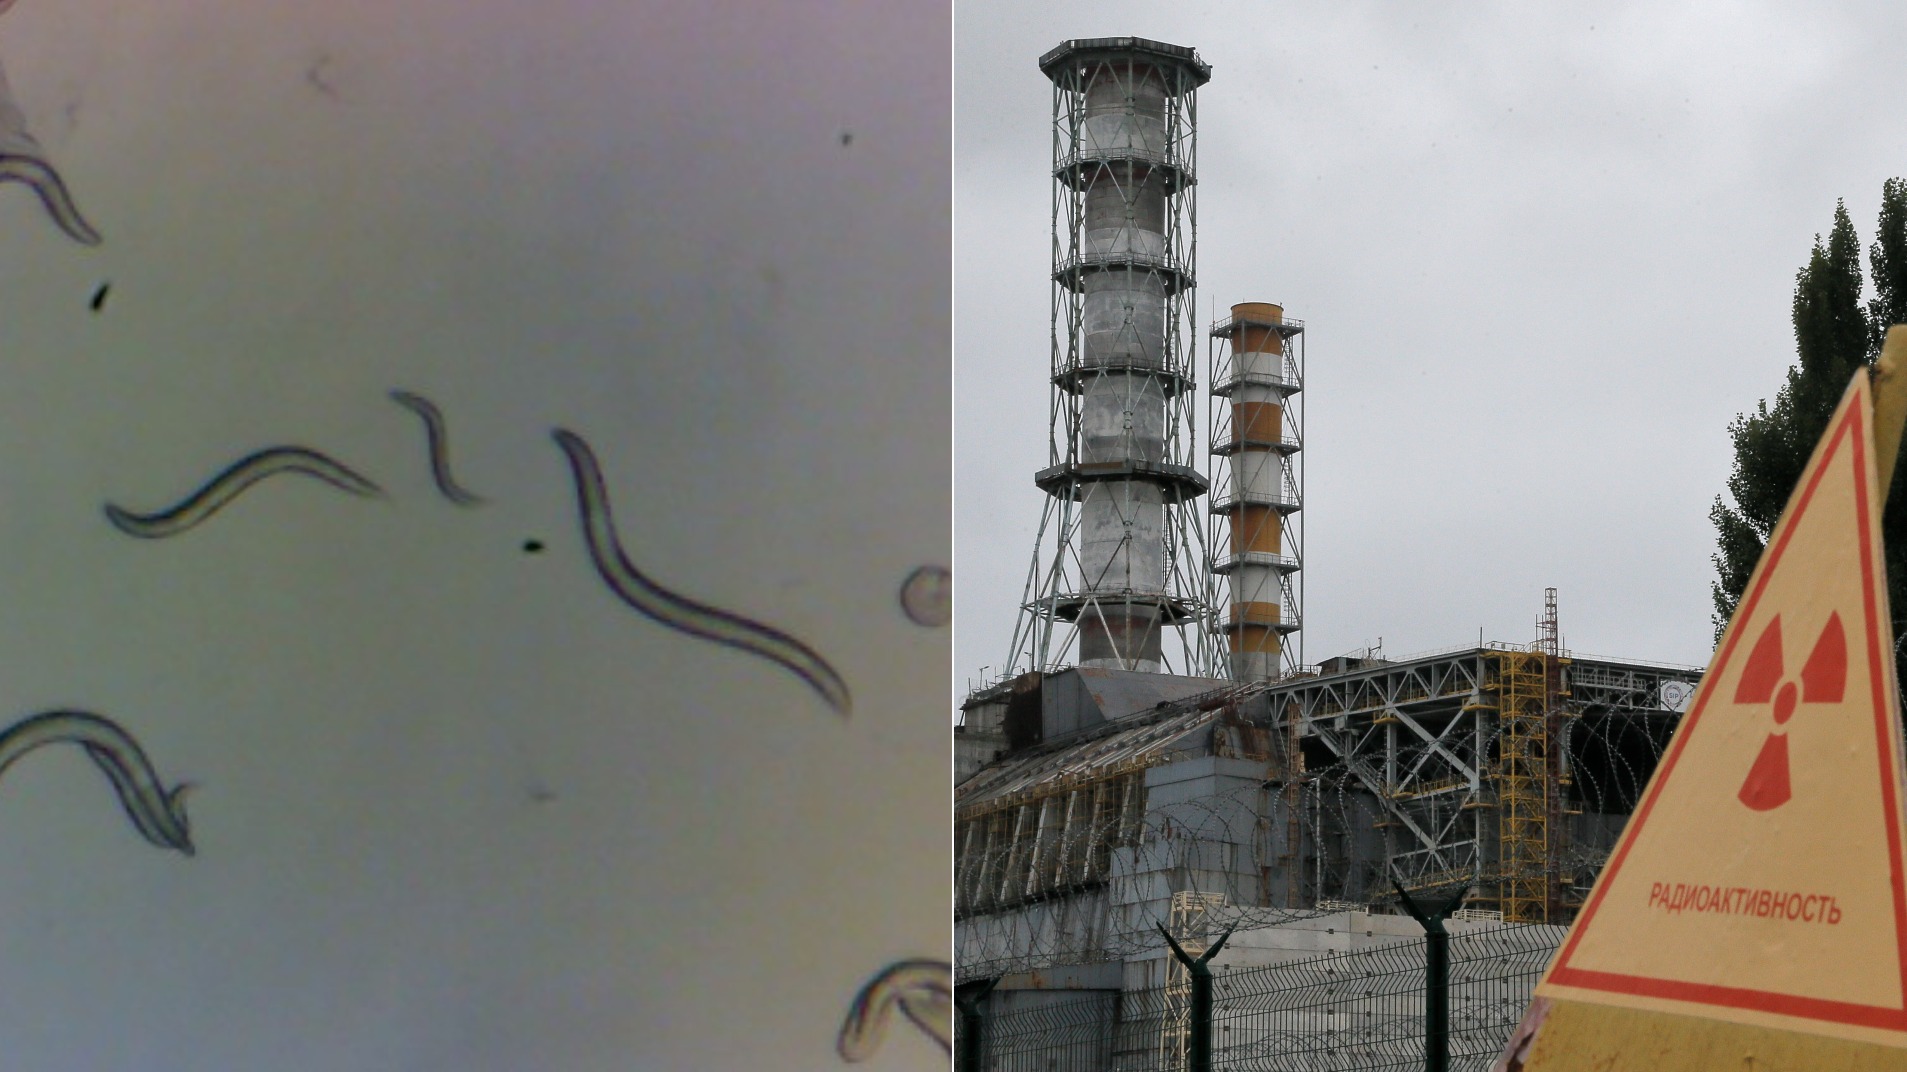 Radiation resistant worms in Chernobyl could be key for cancer